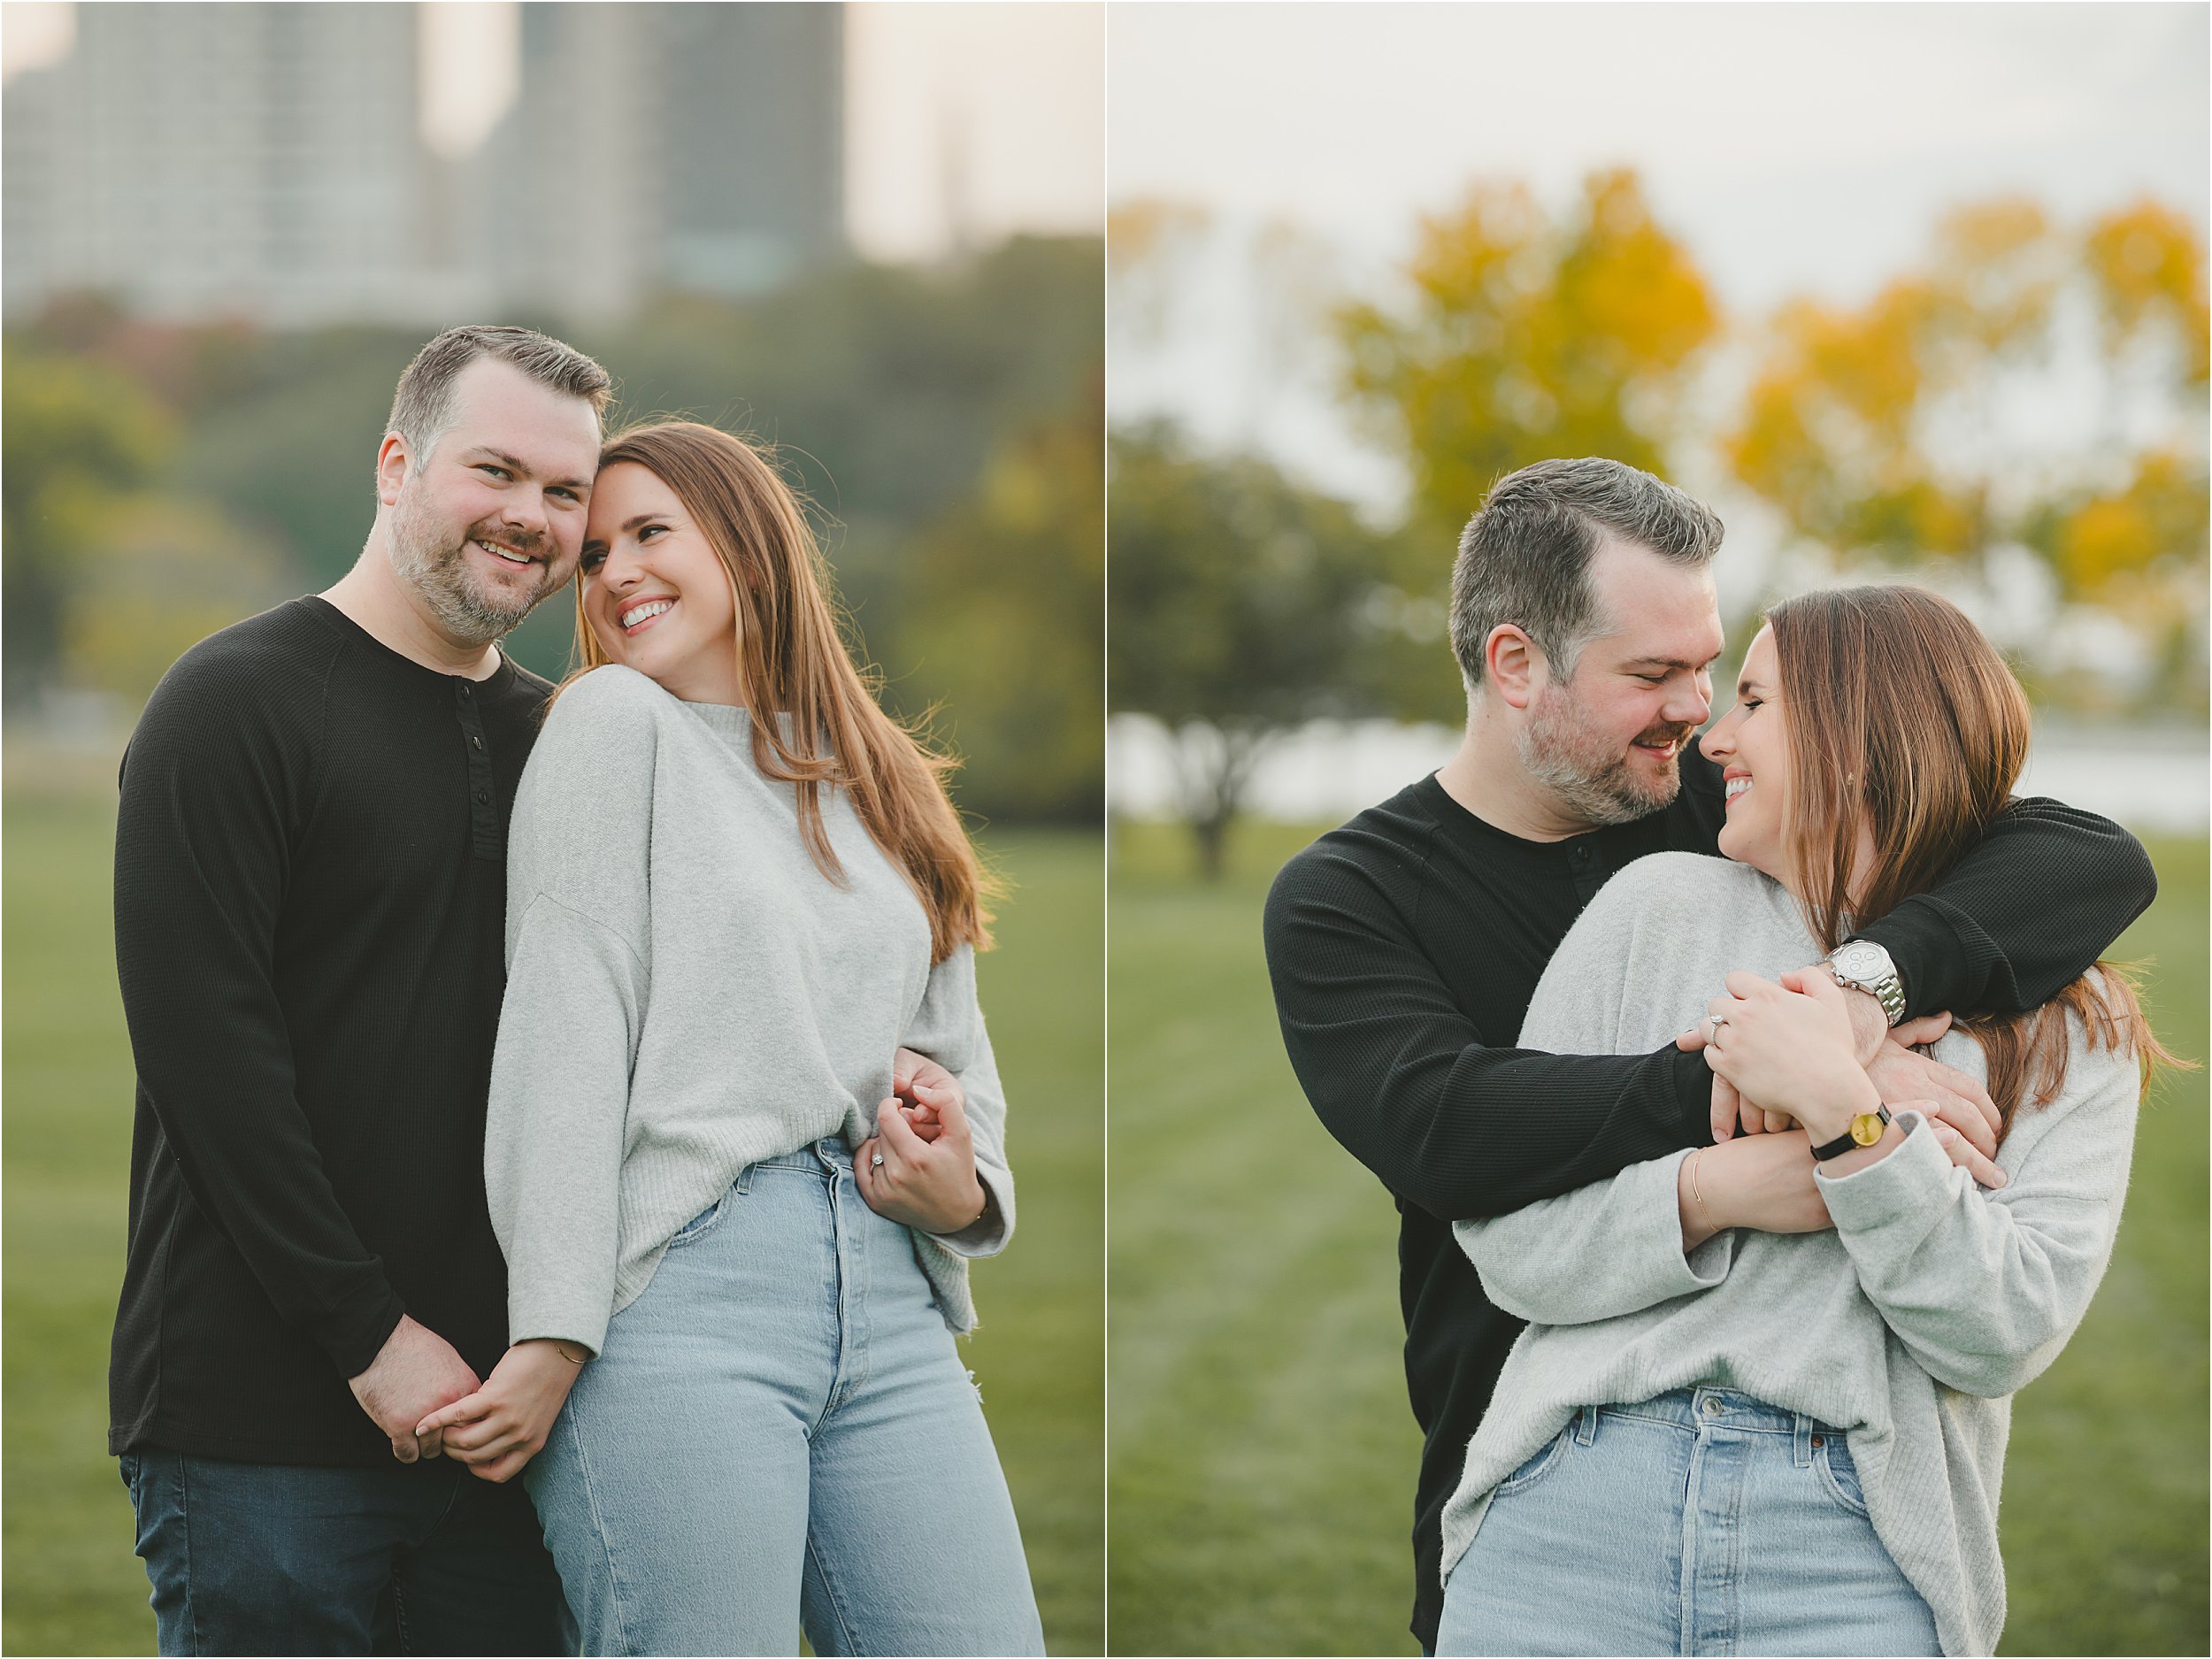 03-relaxed-candid-golden-hour-engagement-photos-lakefront-downtown.JPG